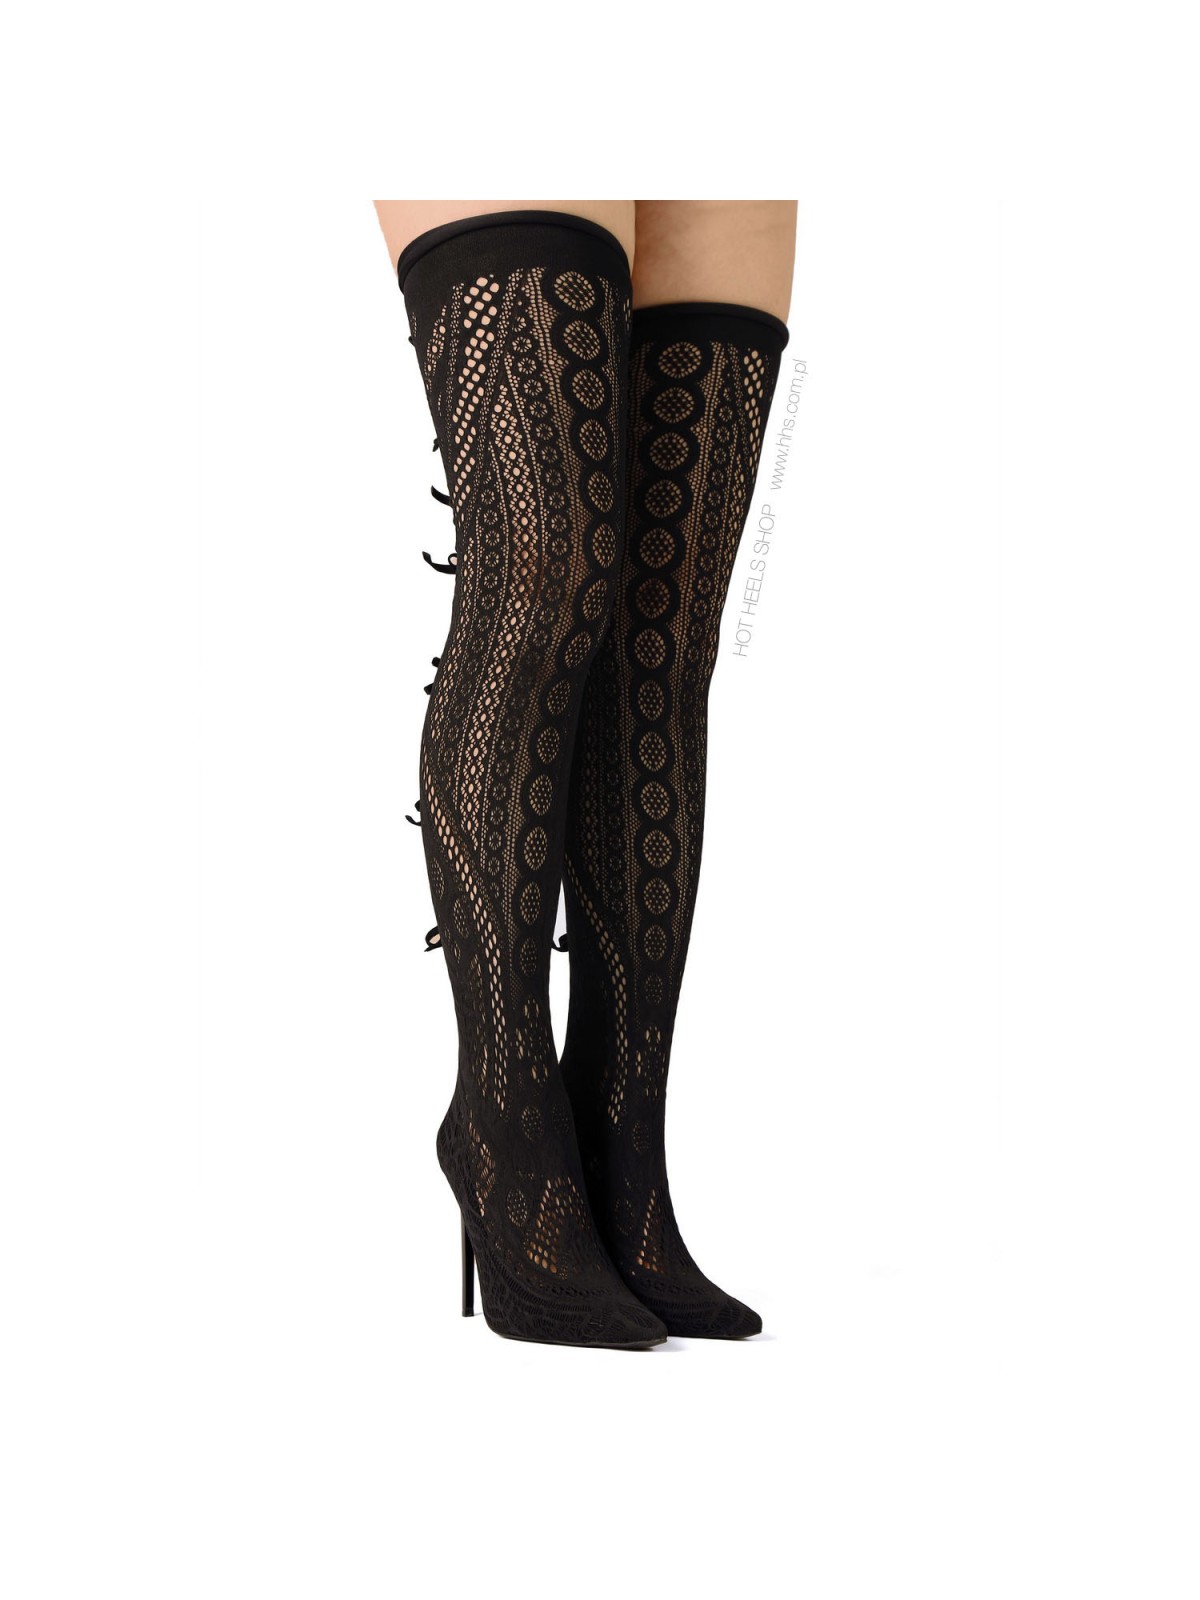 Giaro DESTROYER Black shiny over-the-knee boots witch chunky heels